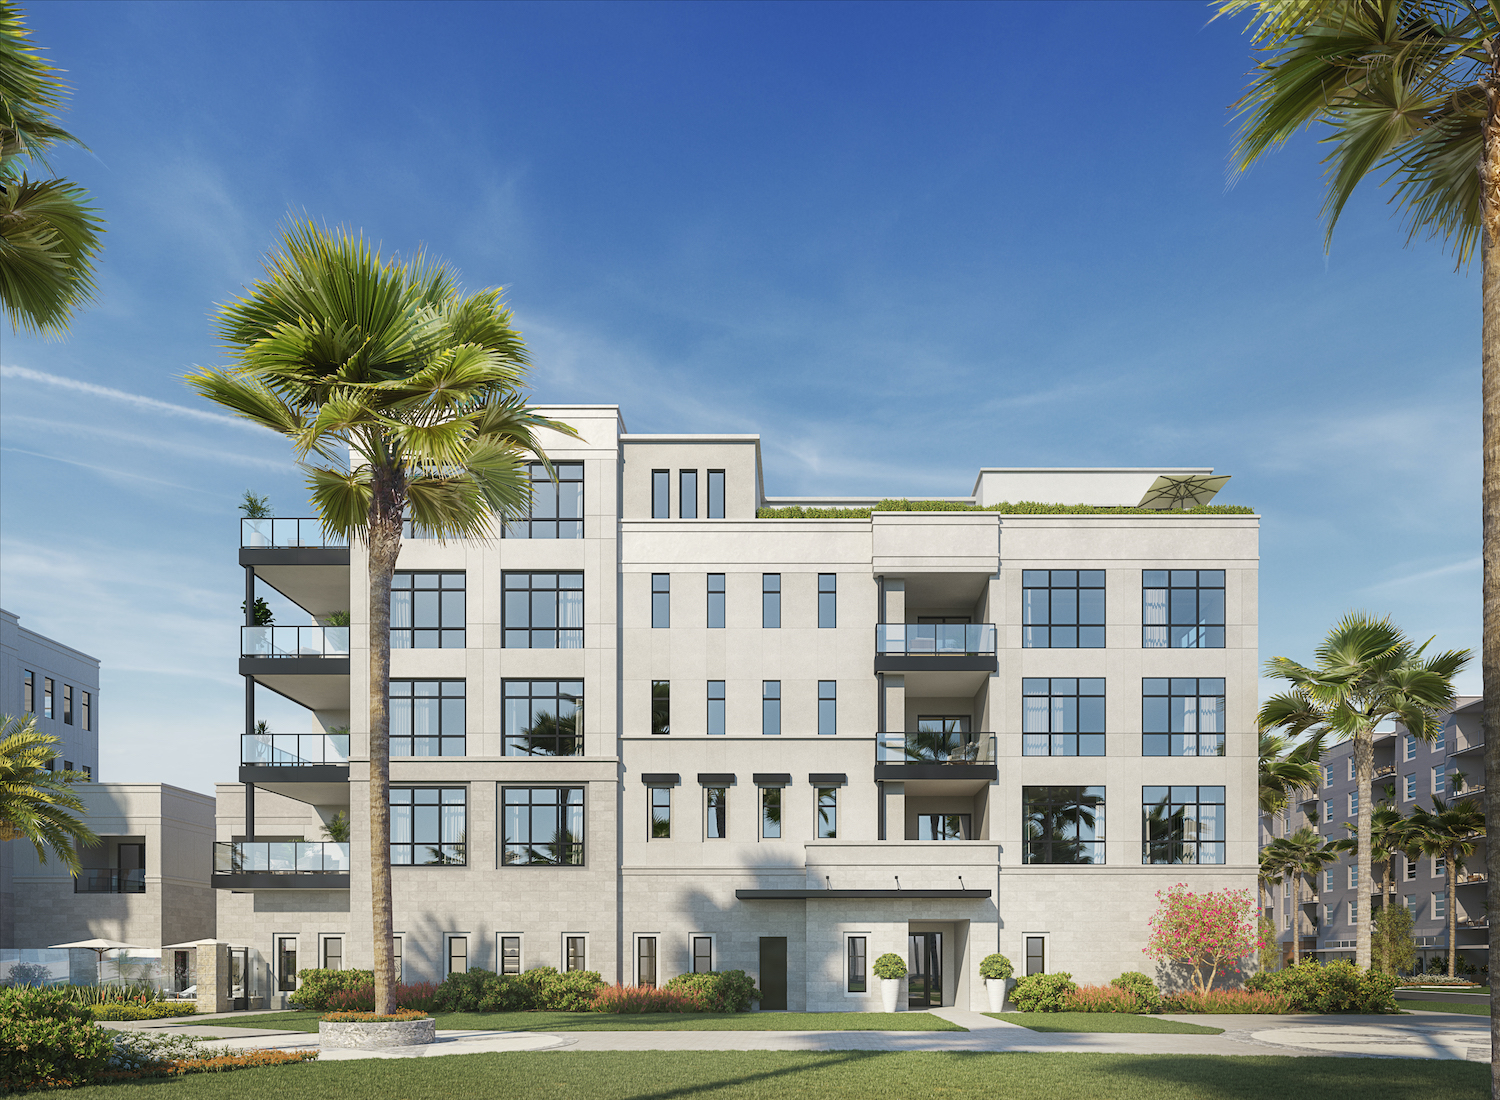 Shopoff Secures Construction Loan for Southern California Condo Project